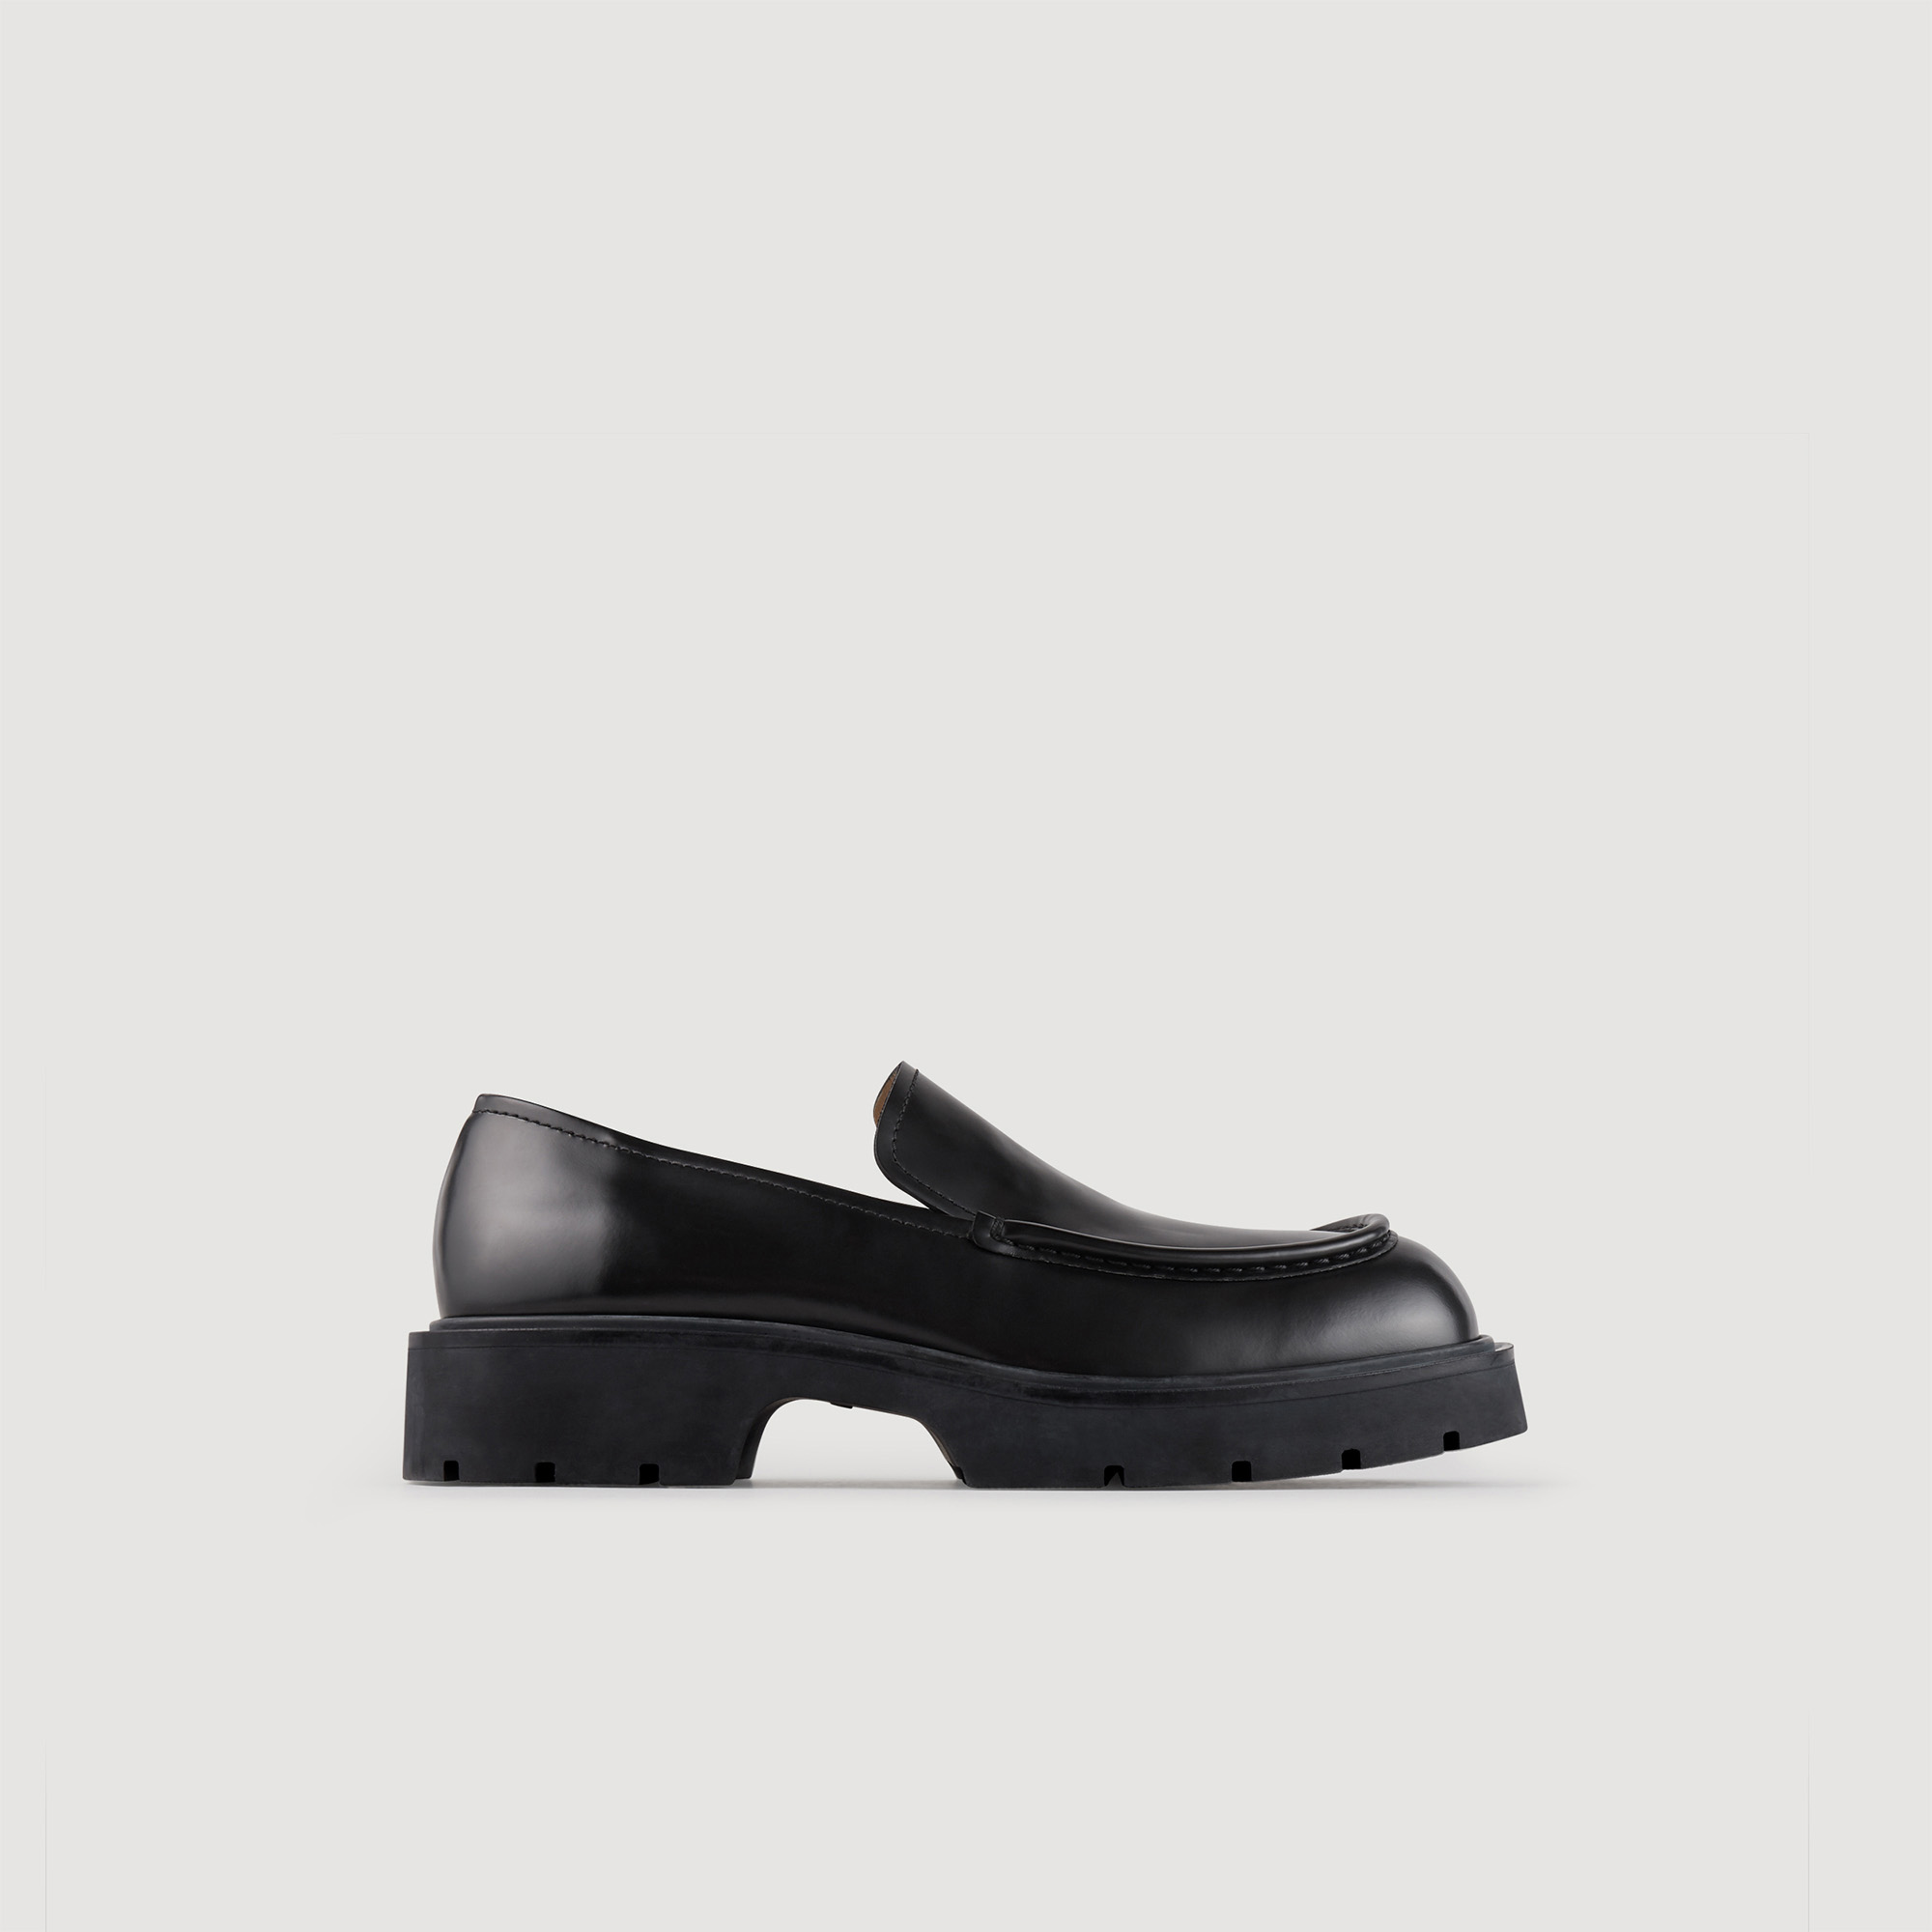 Sandro rubber Leather: Patent leather loafers with a chunky toe, a plain vamp with hand-stitched platform and a thick, one-piece sole with tread in an exclusive Sandro design